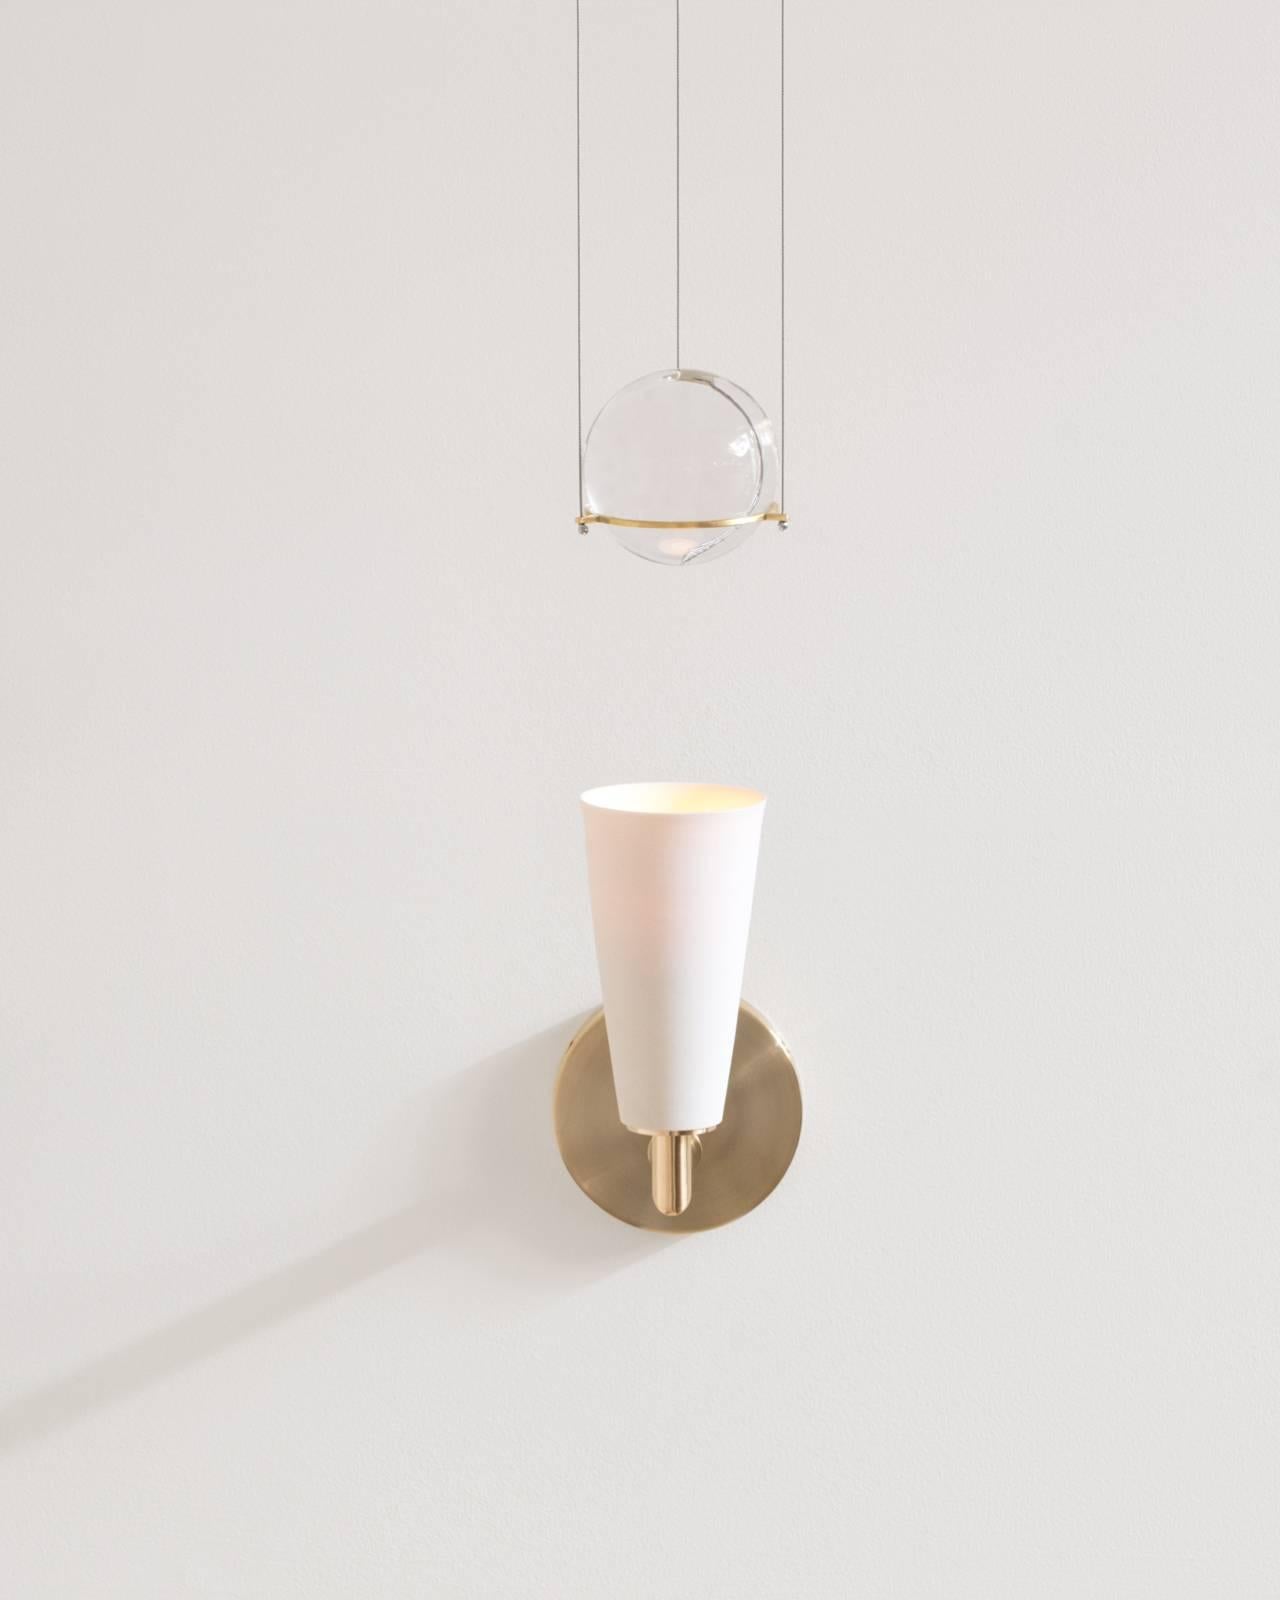 Grace is a contemporary union of softness and structure. A porcelain and brass-mounted light illuminates and engages an artfully suspended blown glass sphere.

Details:

Glass sphere blown by John Hogan.

Wheel-thrown porcelain shade by Lilith